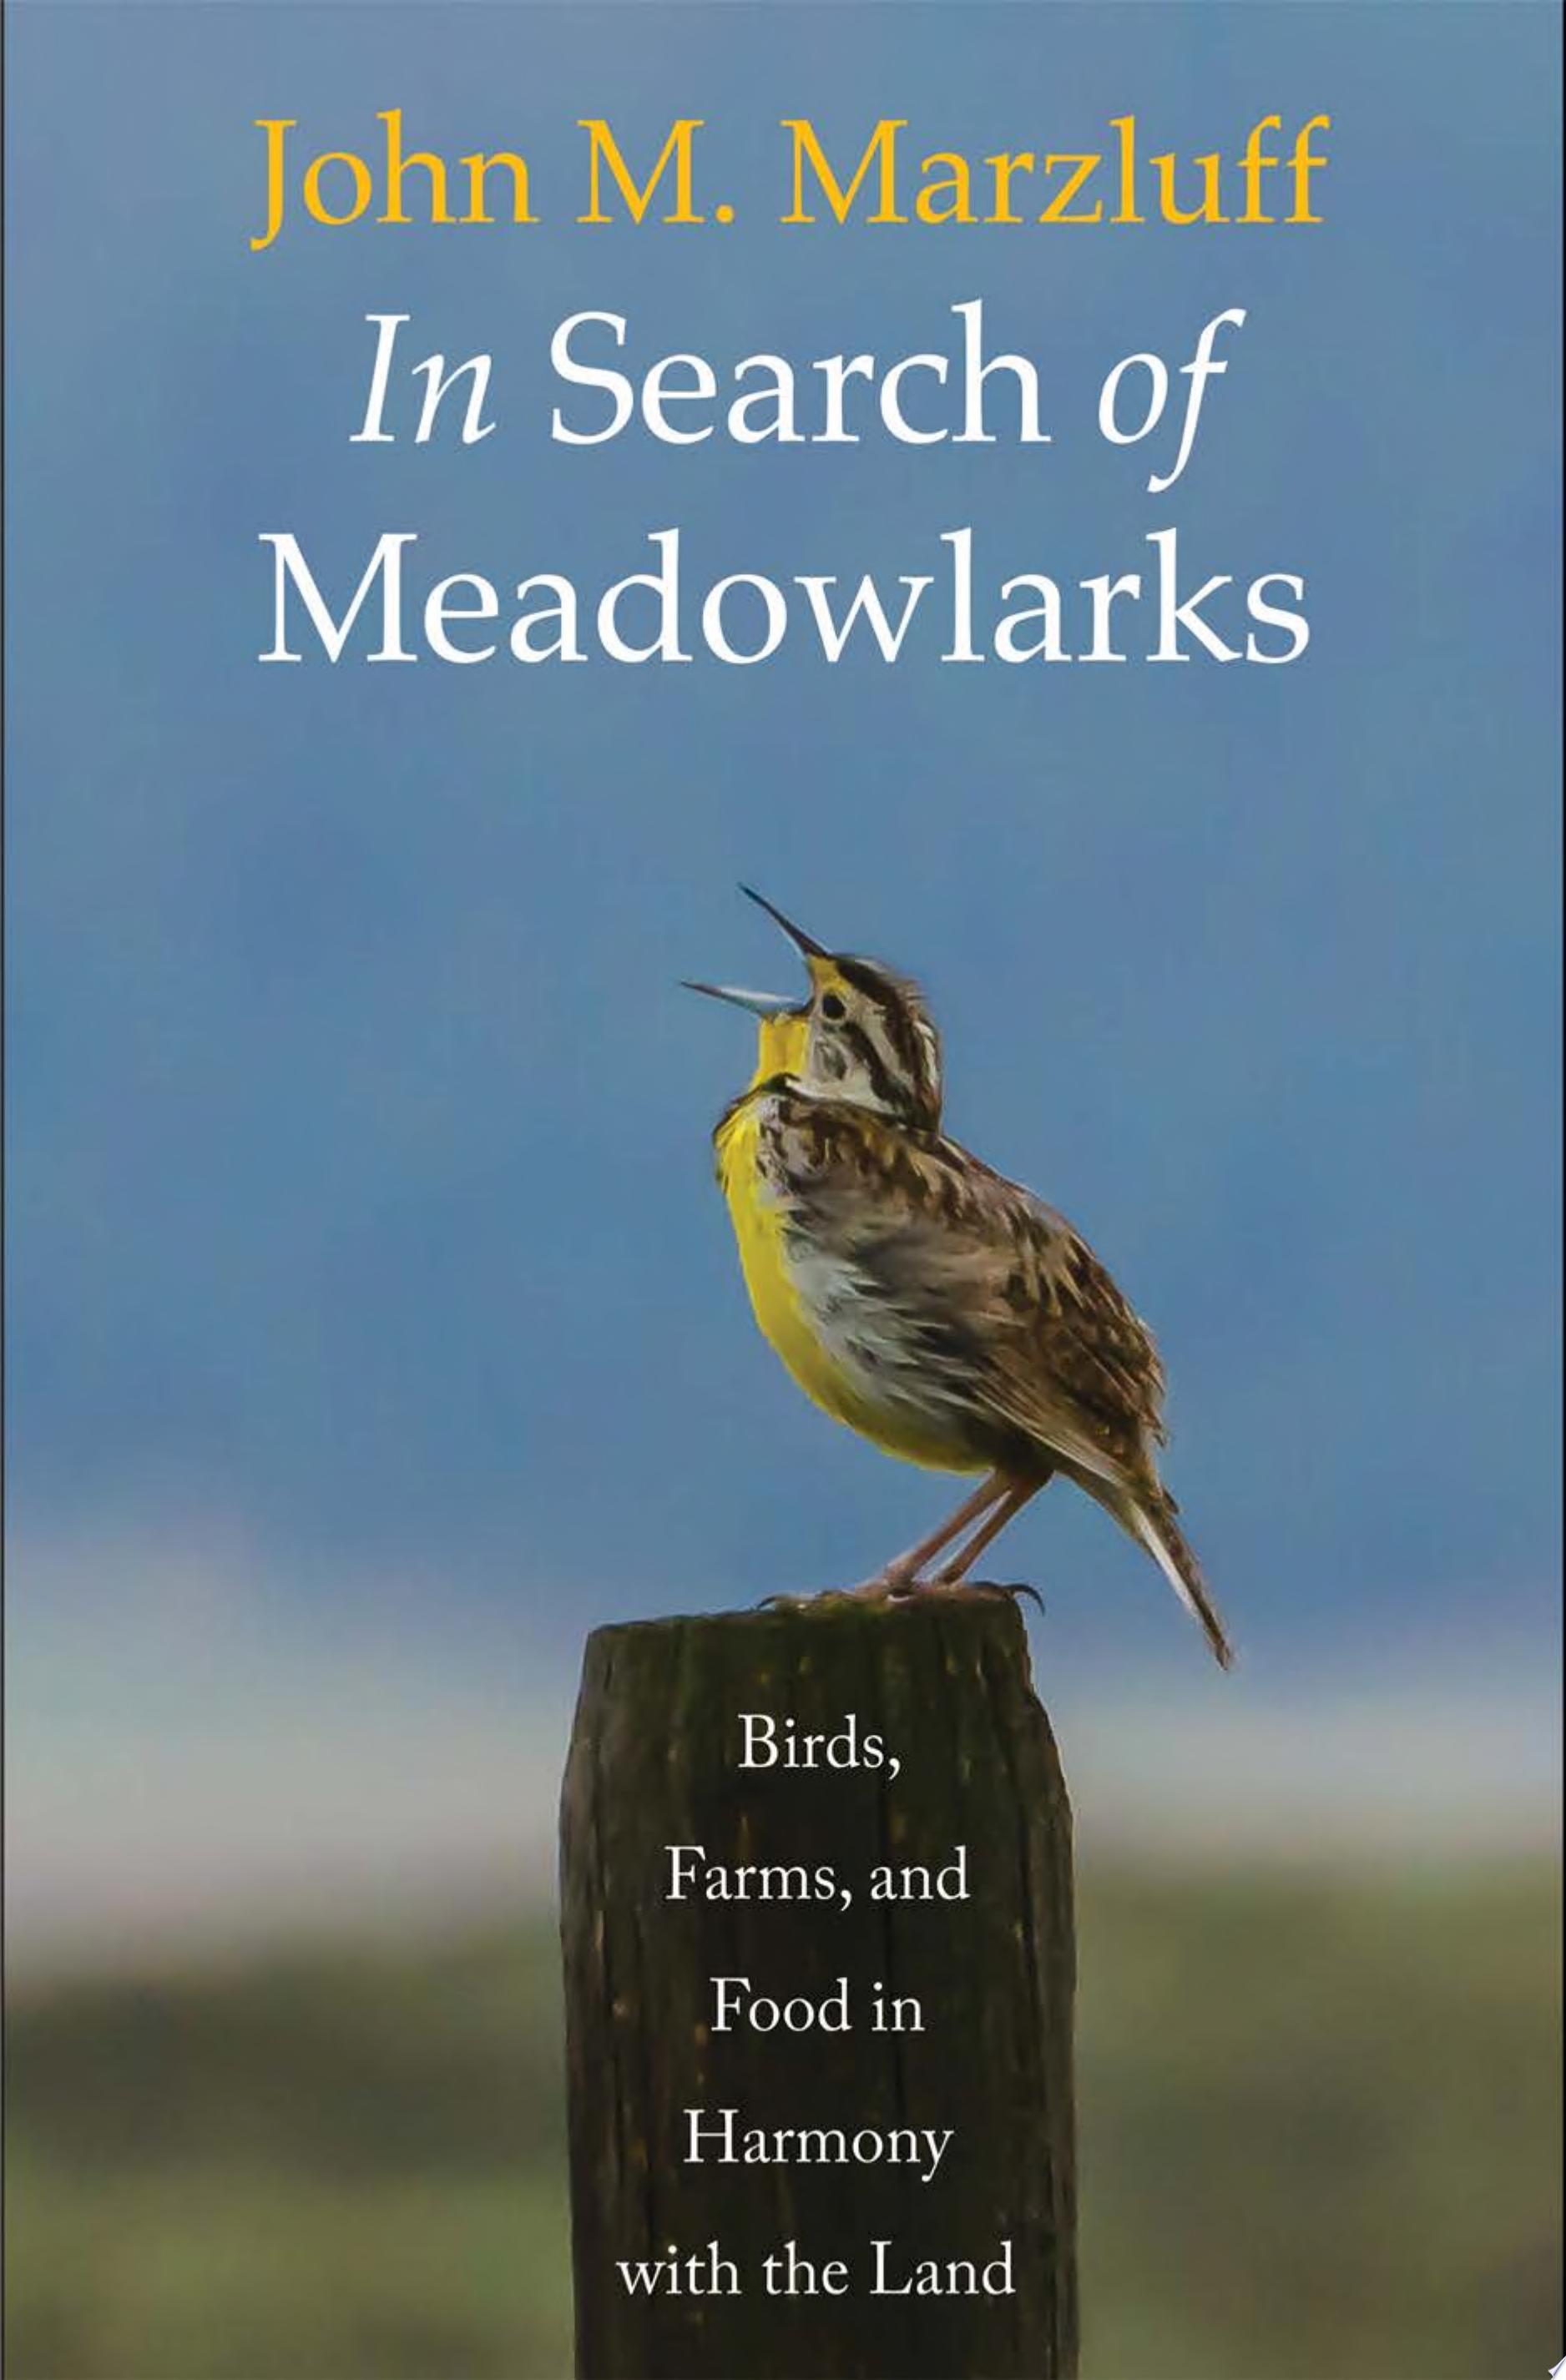 Image for "In Search of Meadowlarks - Birds, Farms, and Food in Harmony with the Land"